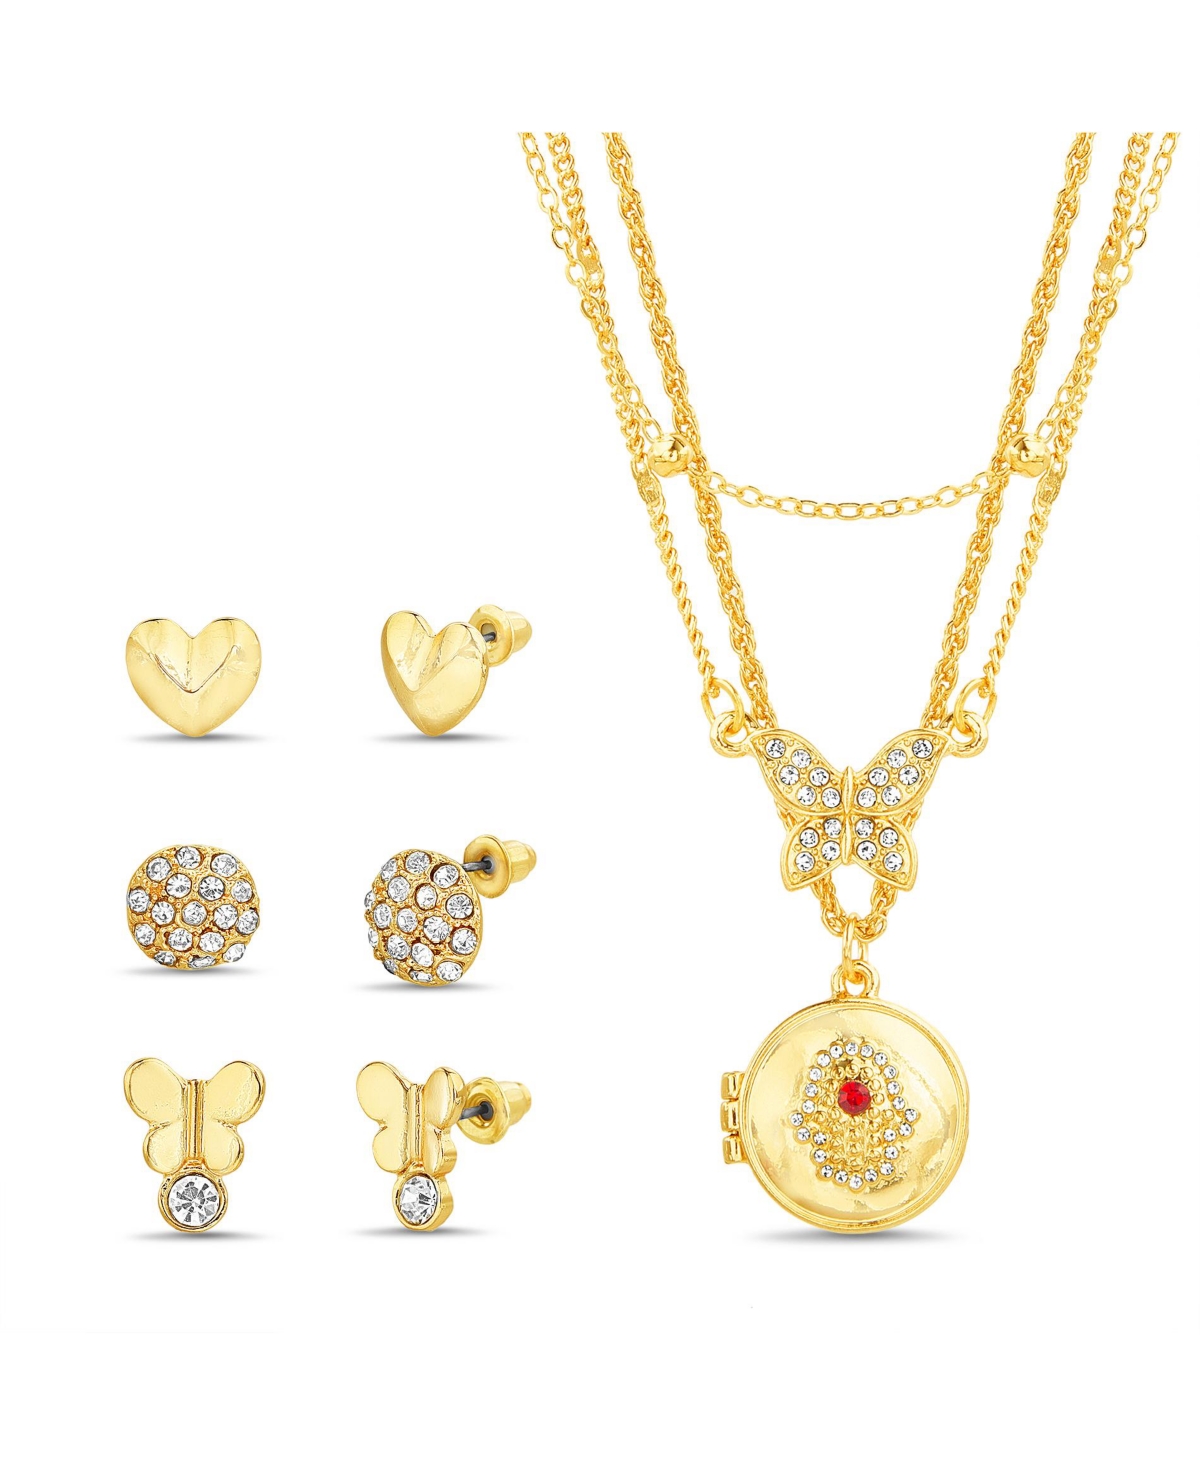 Chain Necklace and Earrings with Butterfly and Hamsa Set - Gold